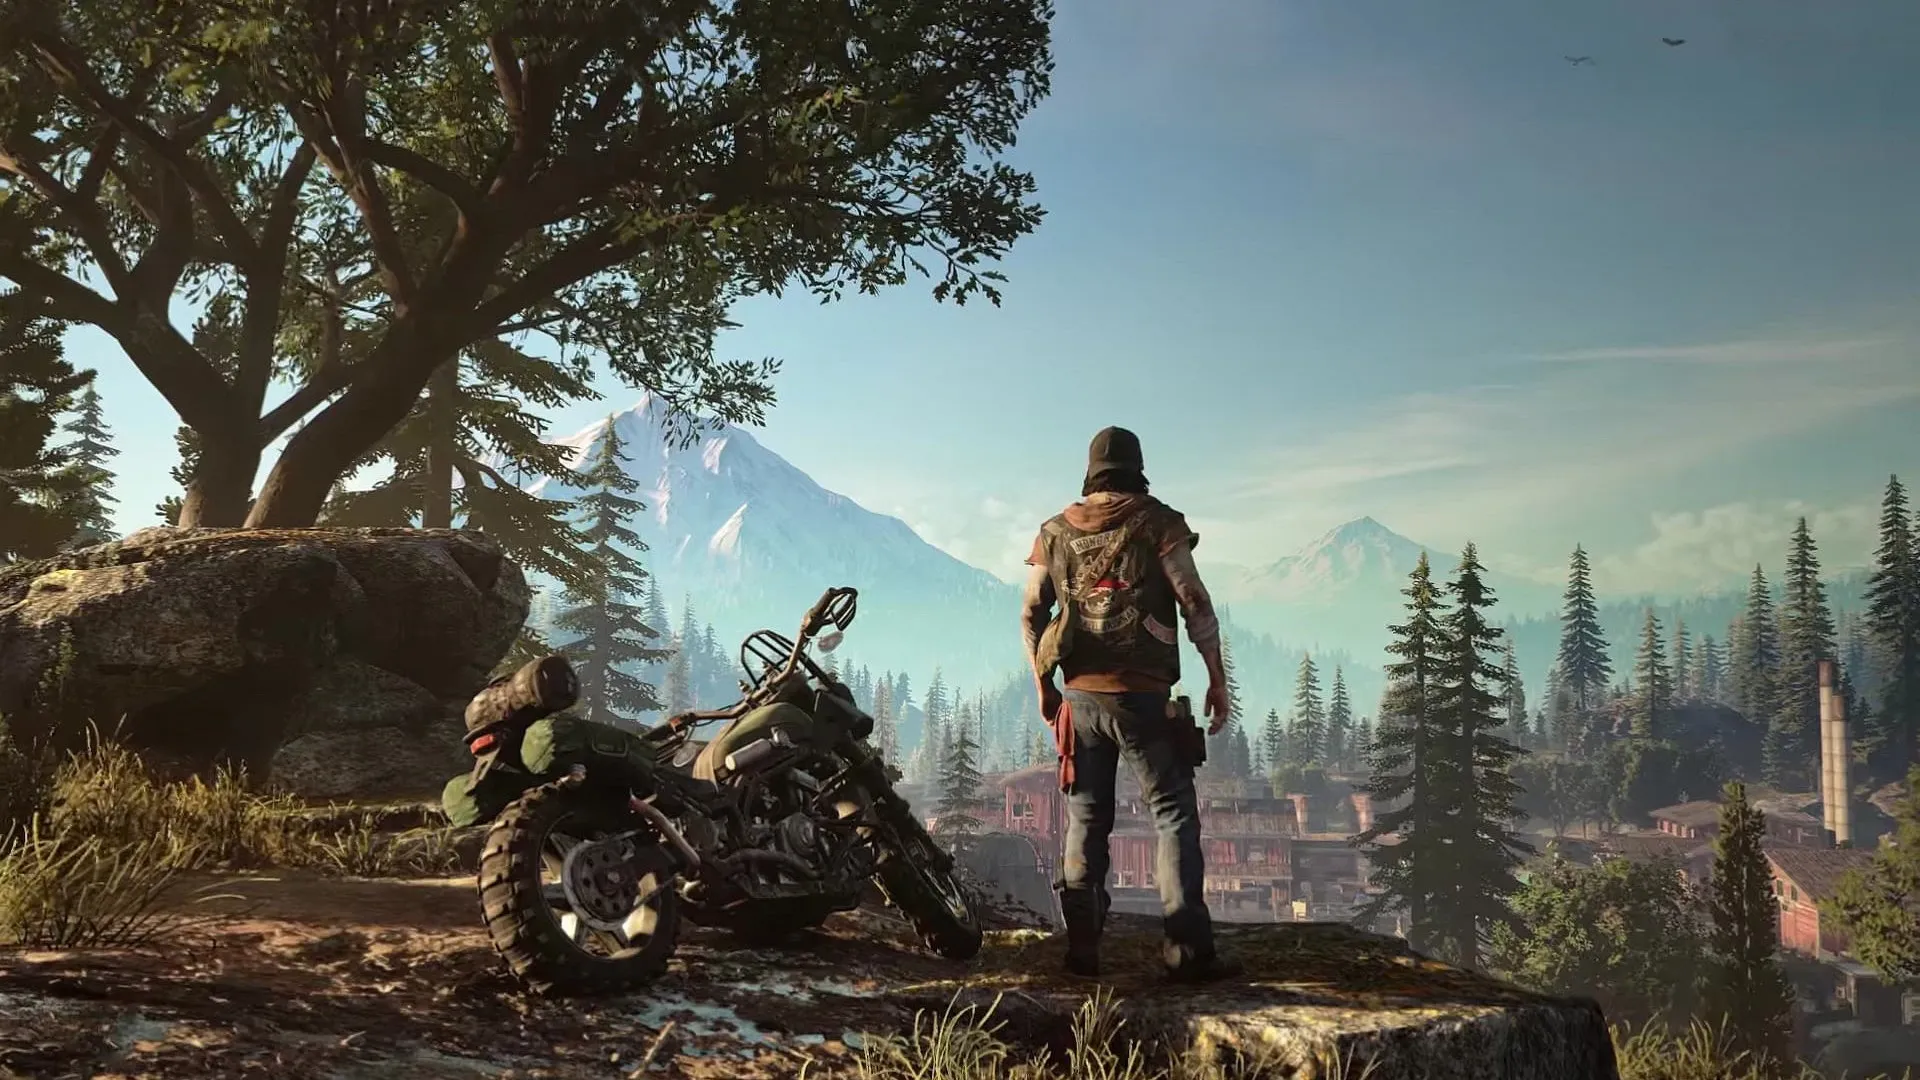 Days Gone, Director: Sony Execs “were never fans”, hence no sequel